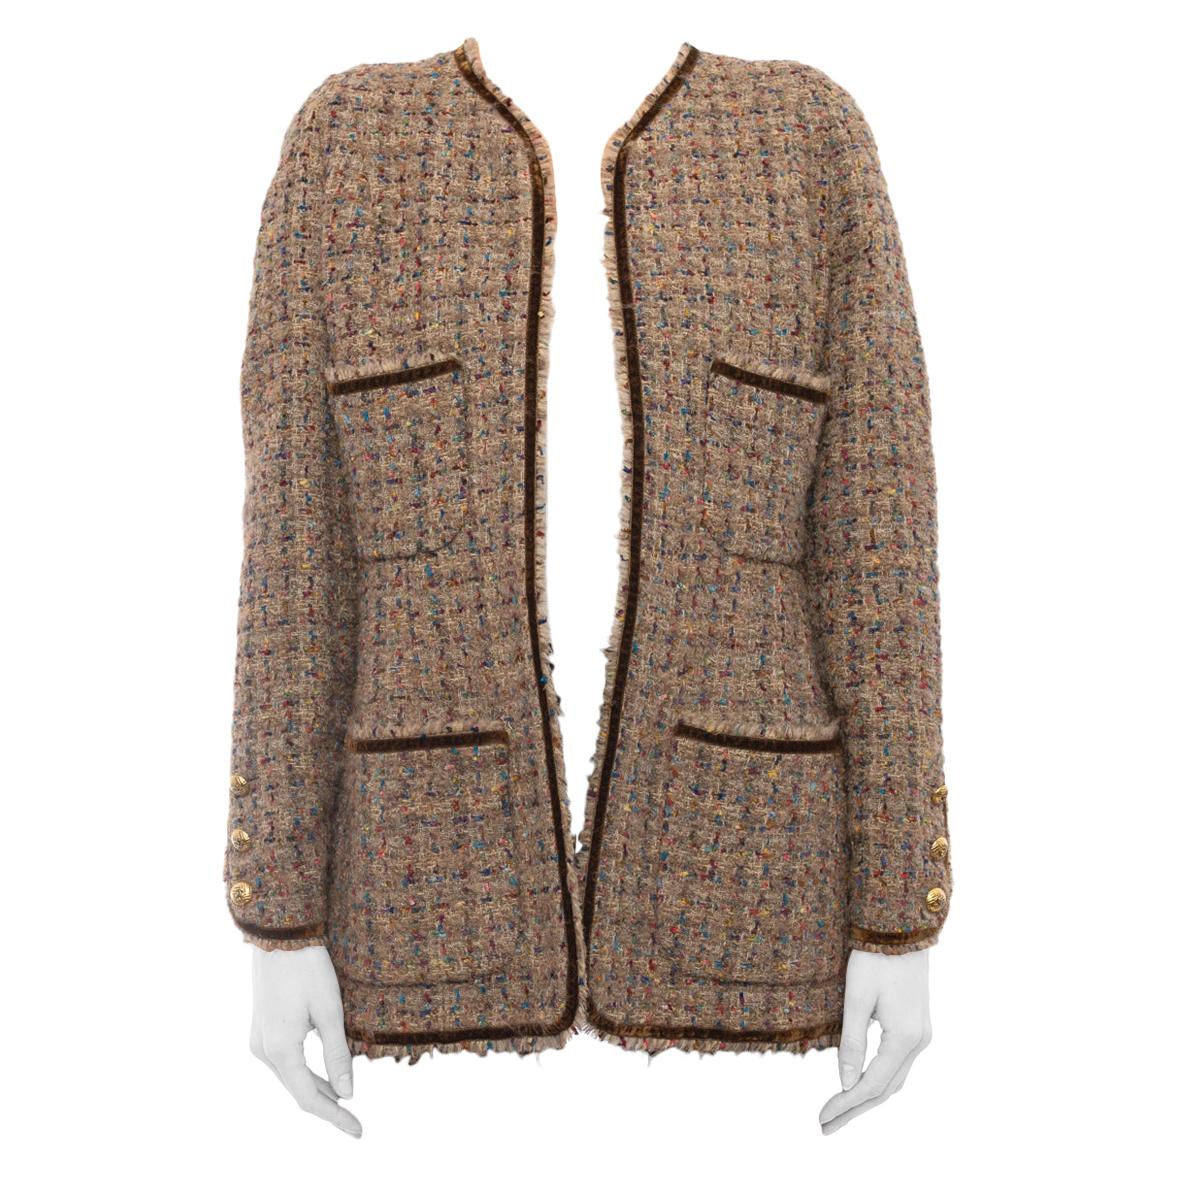 Chanel 1986 Vintage Brown Tweed Jacket with Gold CC Buttons - 42 / 10 For Sale